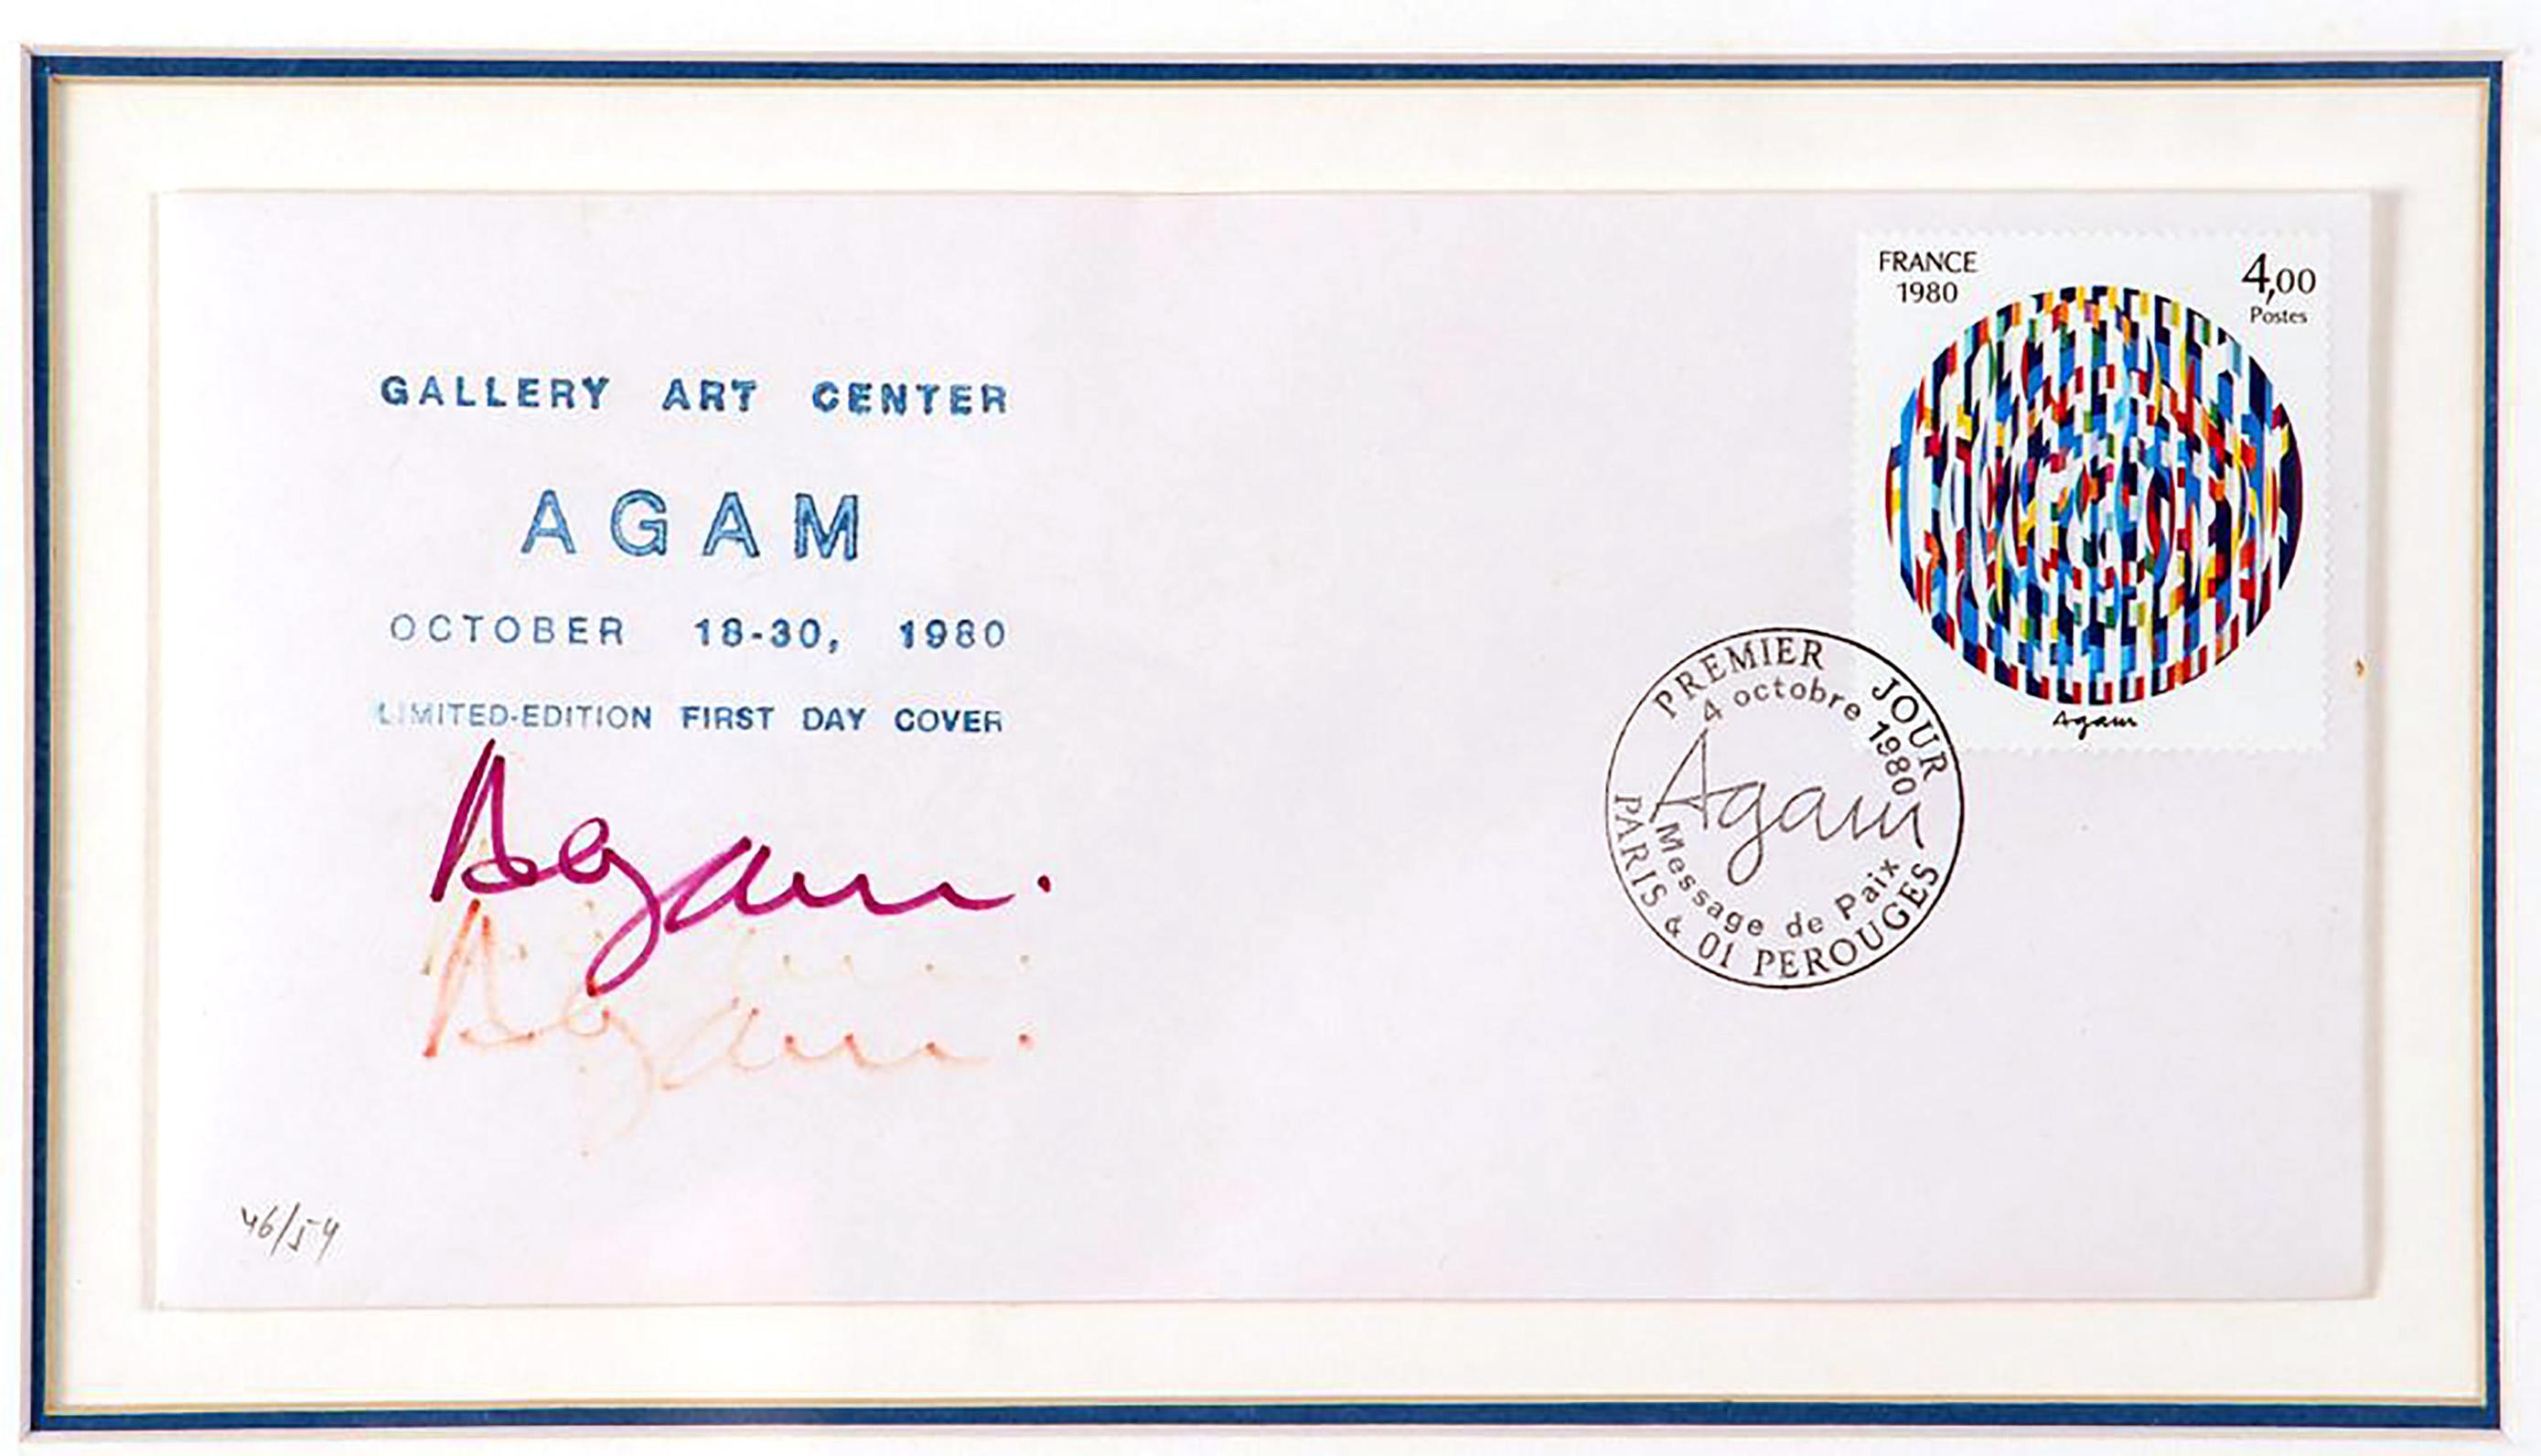 Yaacov Agam
"Life", (Hand Signed and numbered), 1980
Hand Signed, Stamped Gallery Art Center Envelope with French postage stamp & numbered
Triple signature "Agam" and number 46/54 on the front
Frame Included: floated in original vintage frame
This